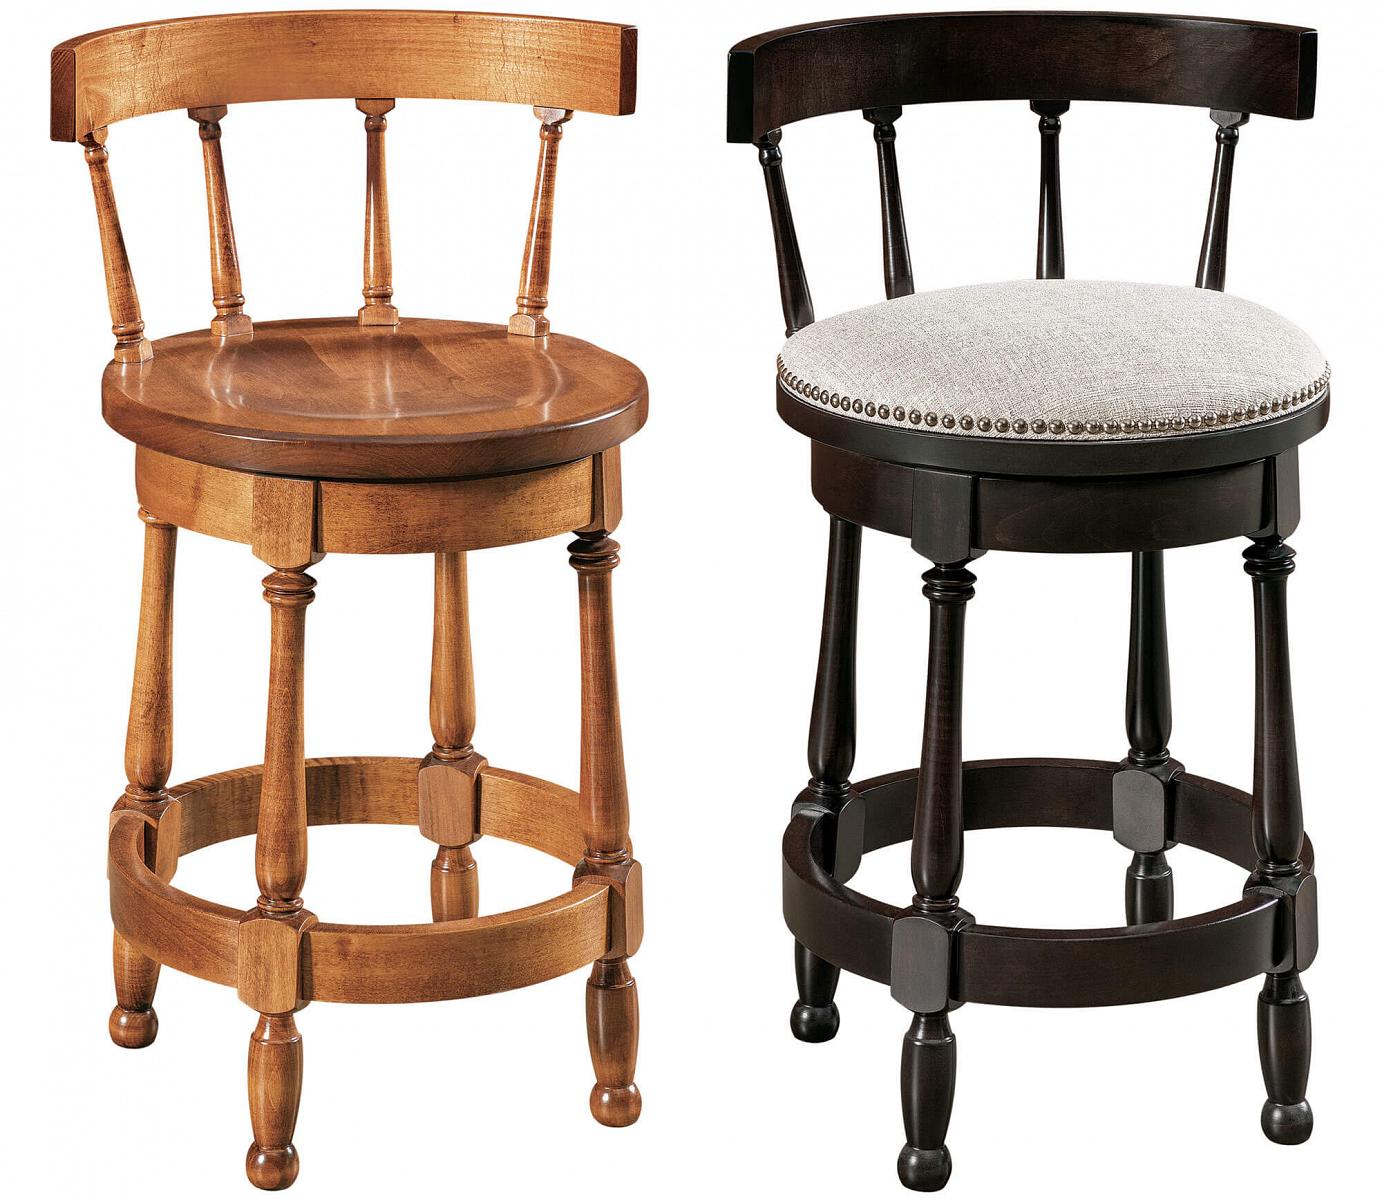 RH Yoder Cosgrove Barstools with Easton Top